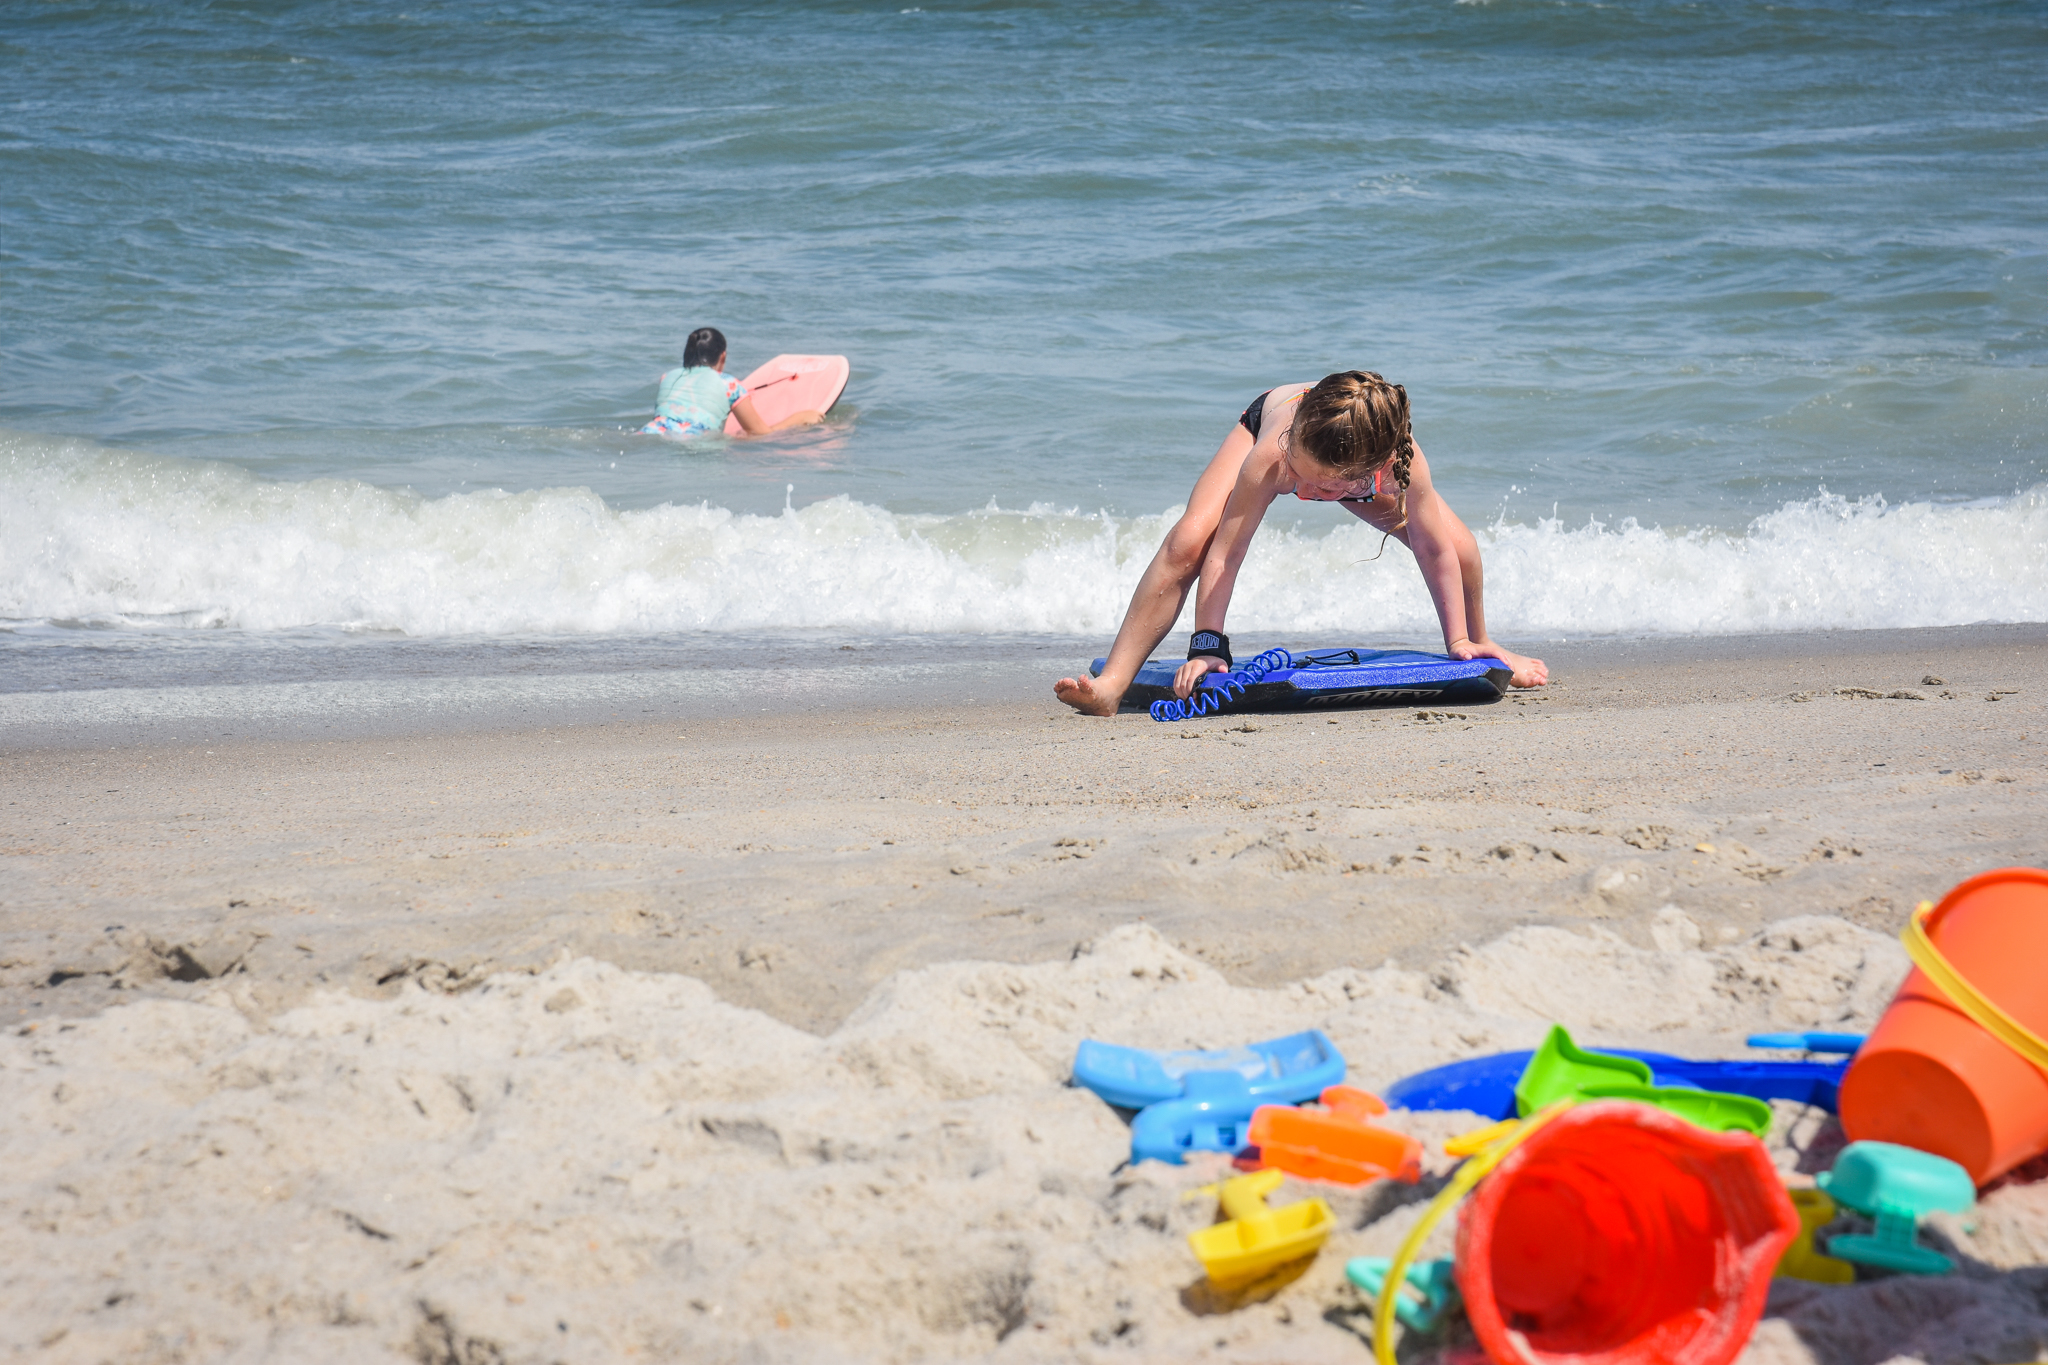 Girls playing in the water at the beach and on the sand with bodyboards and beach toys